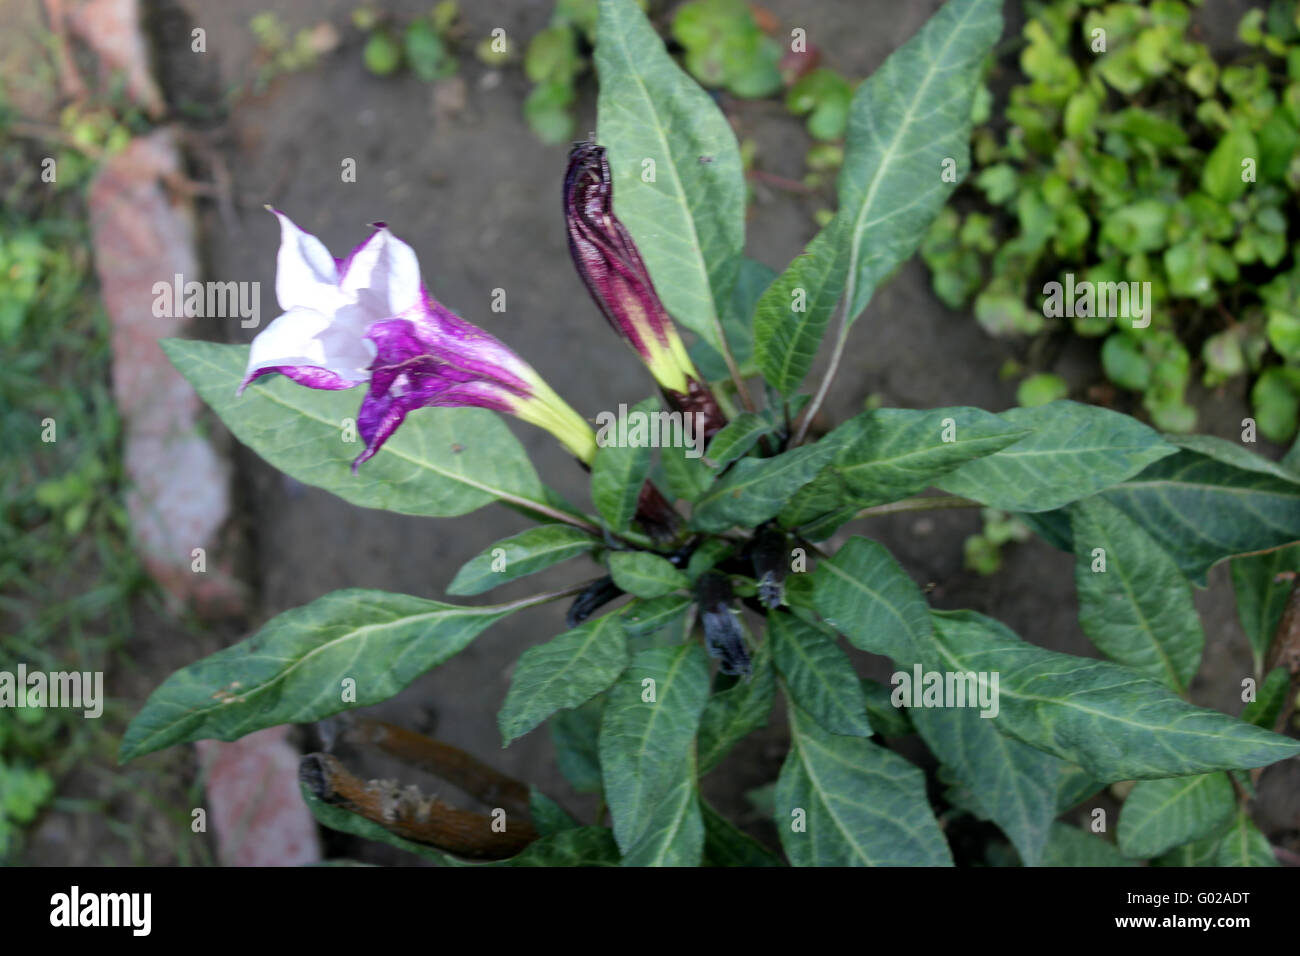 Datura metel, devil's trumpet, cultivar with narrow leaves and crmpled purple flowers, funnel shaped, ornamental, medicinal Stock Photo